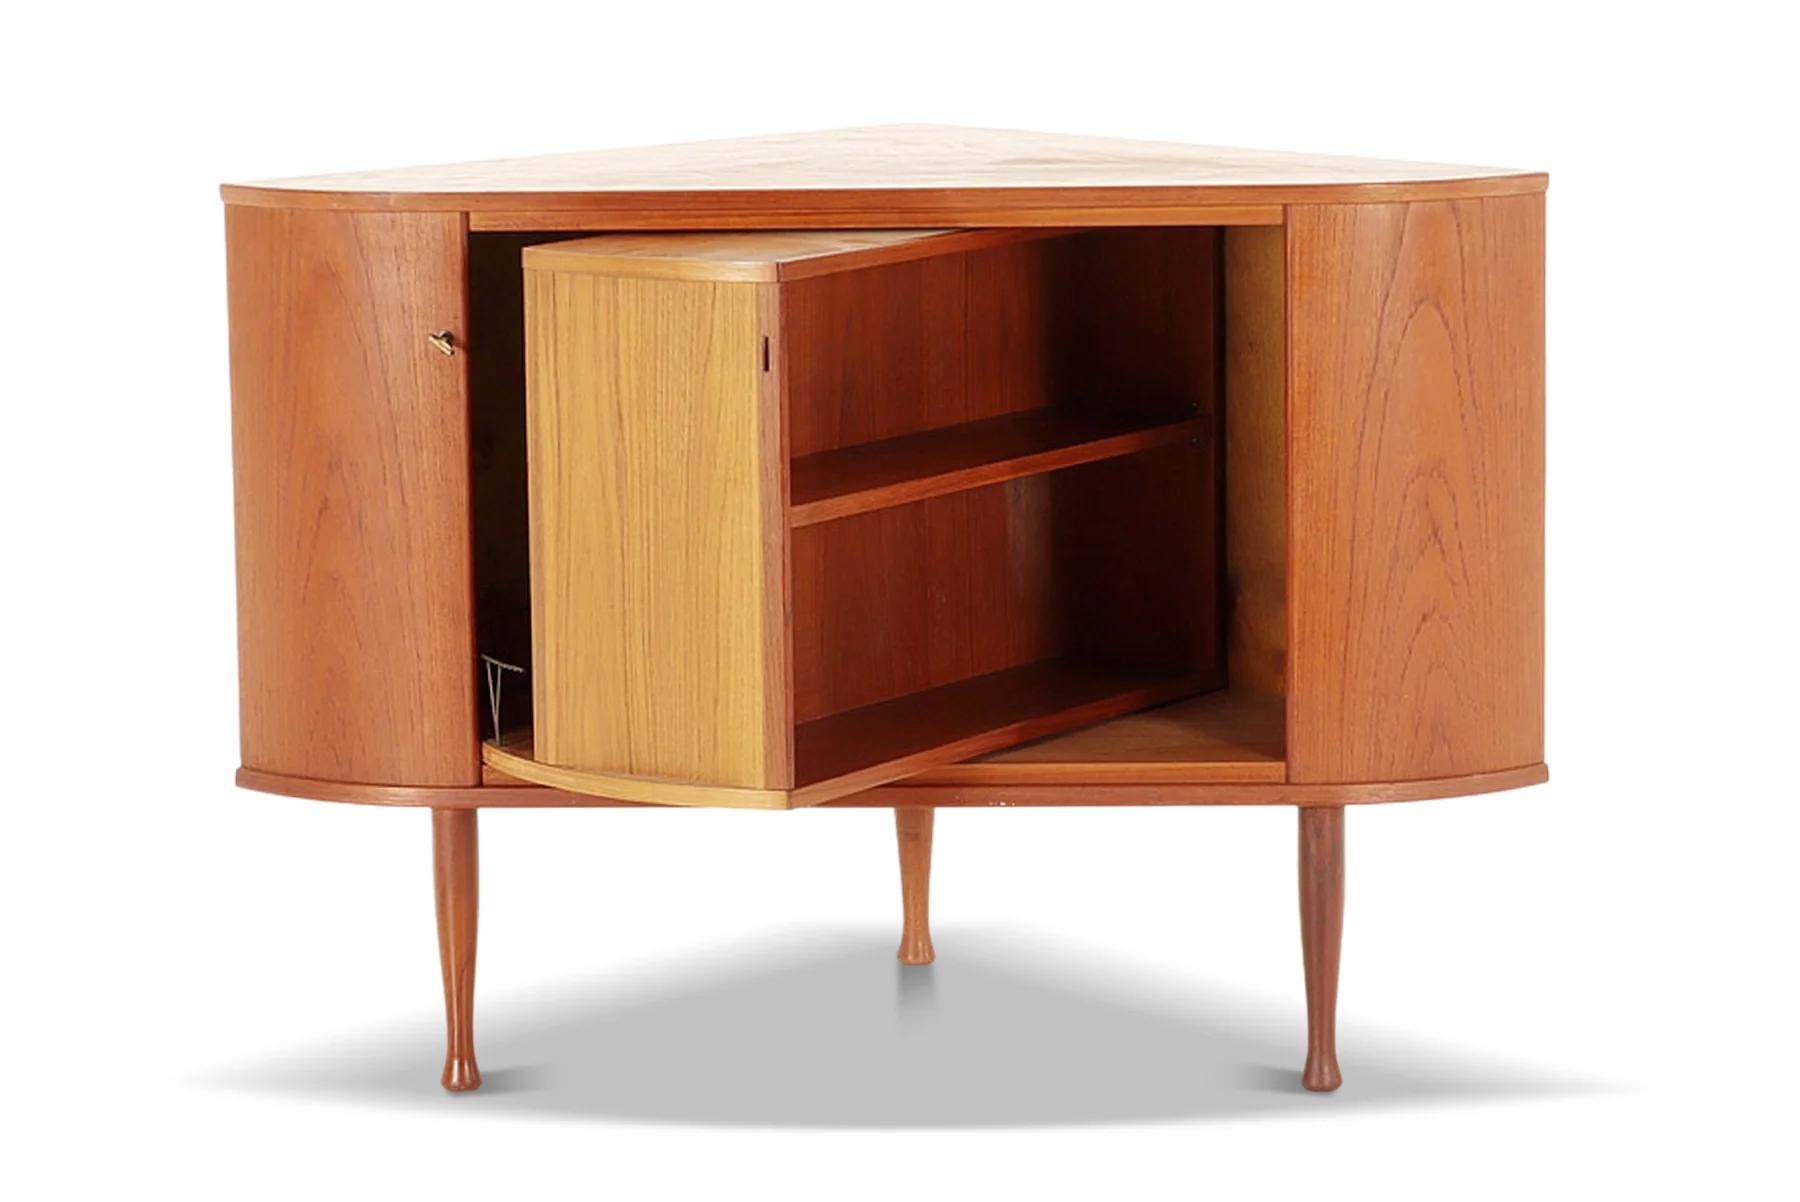 Mid-Century Modern Rotating bookcase / bar cabinet by sola møbelfabrik #2 For Sale